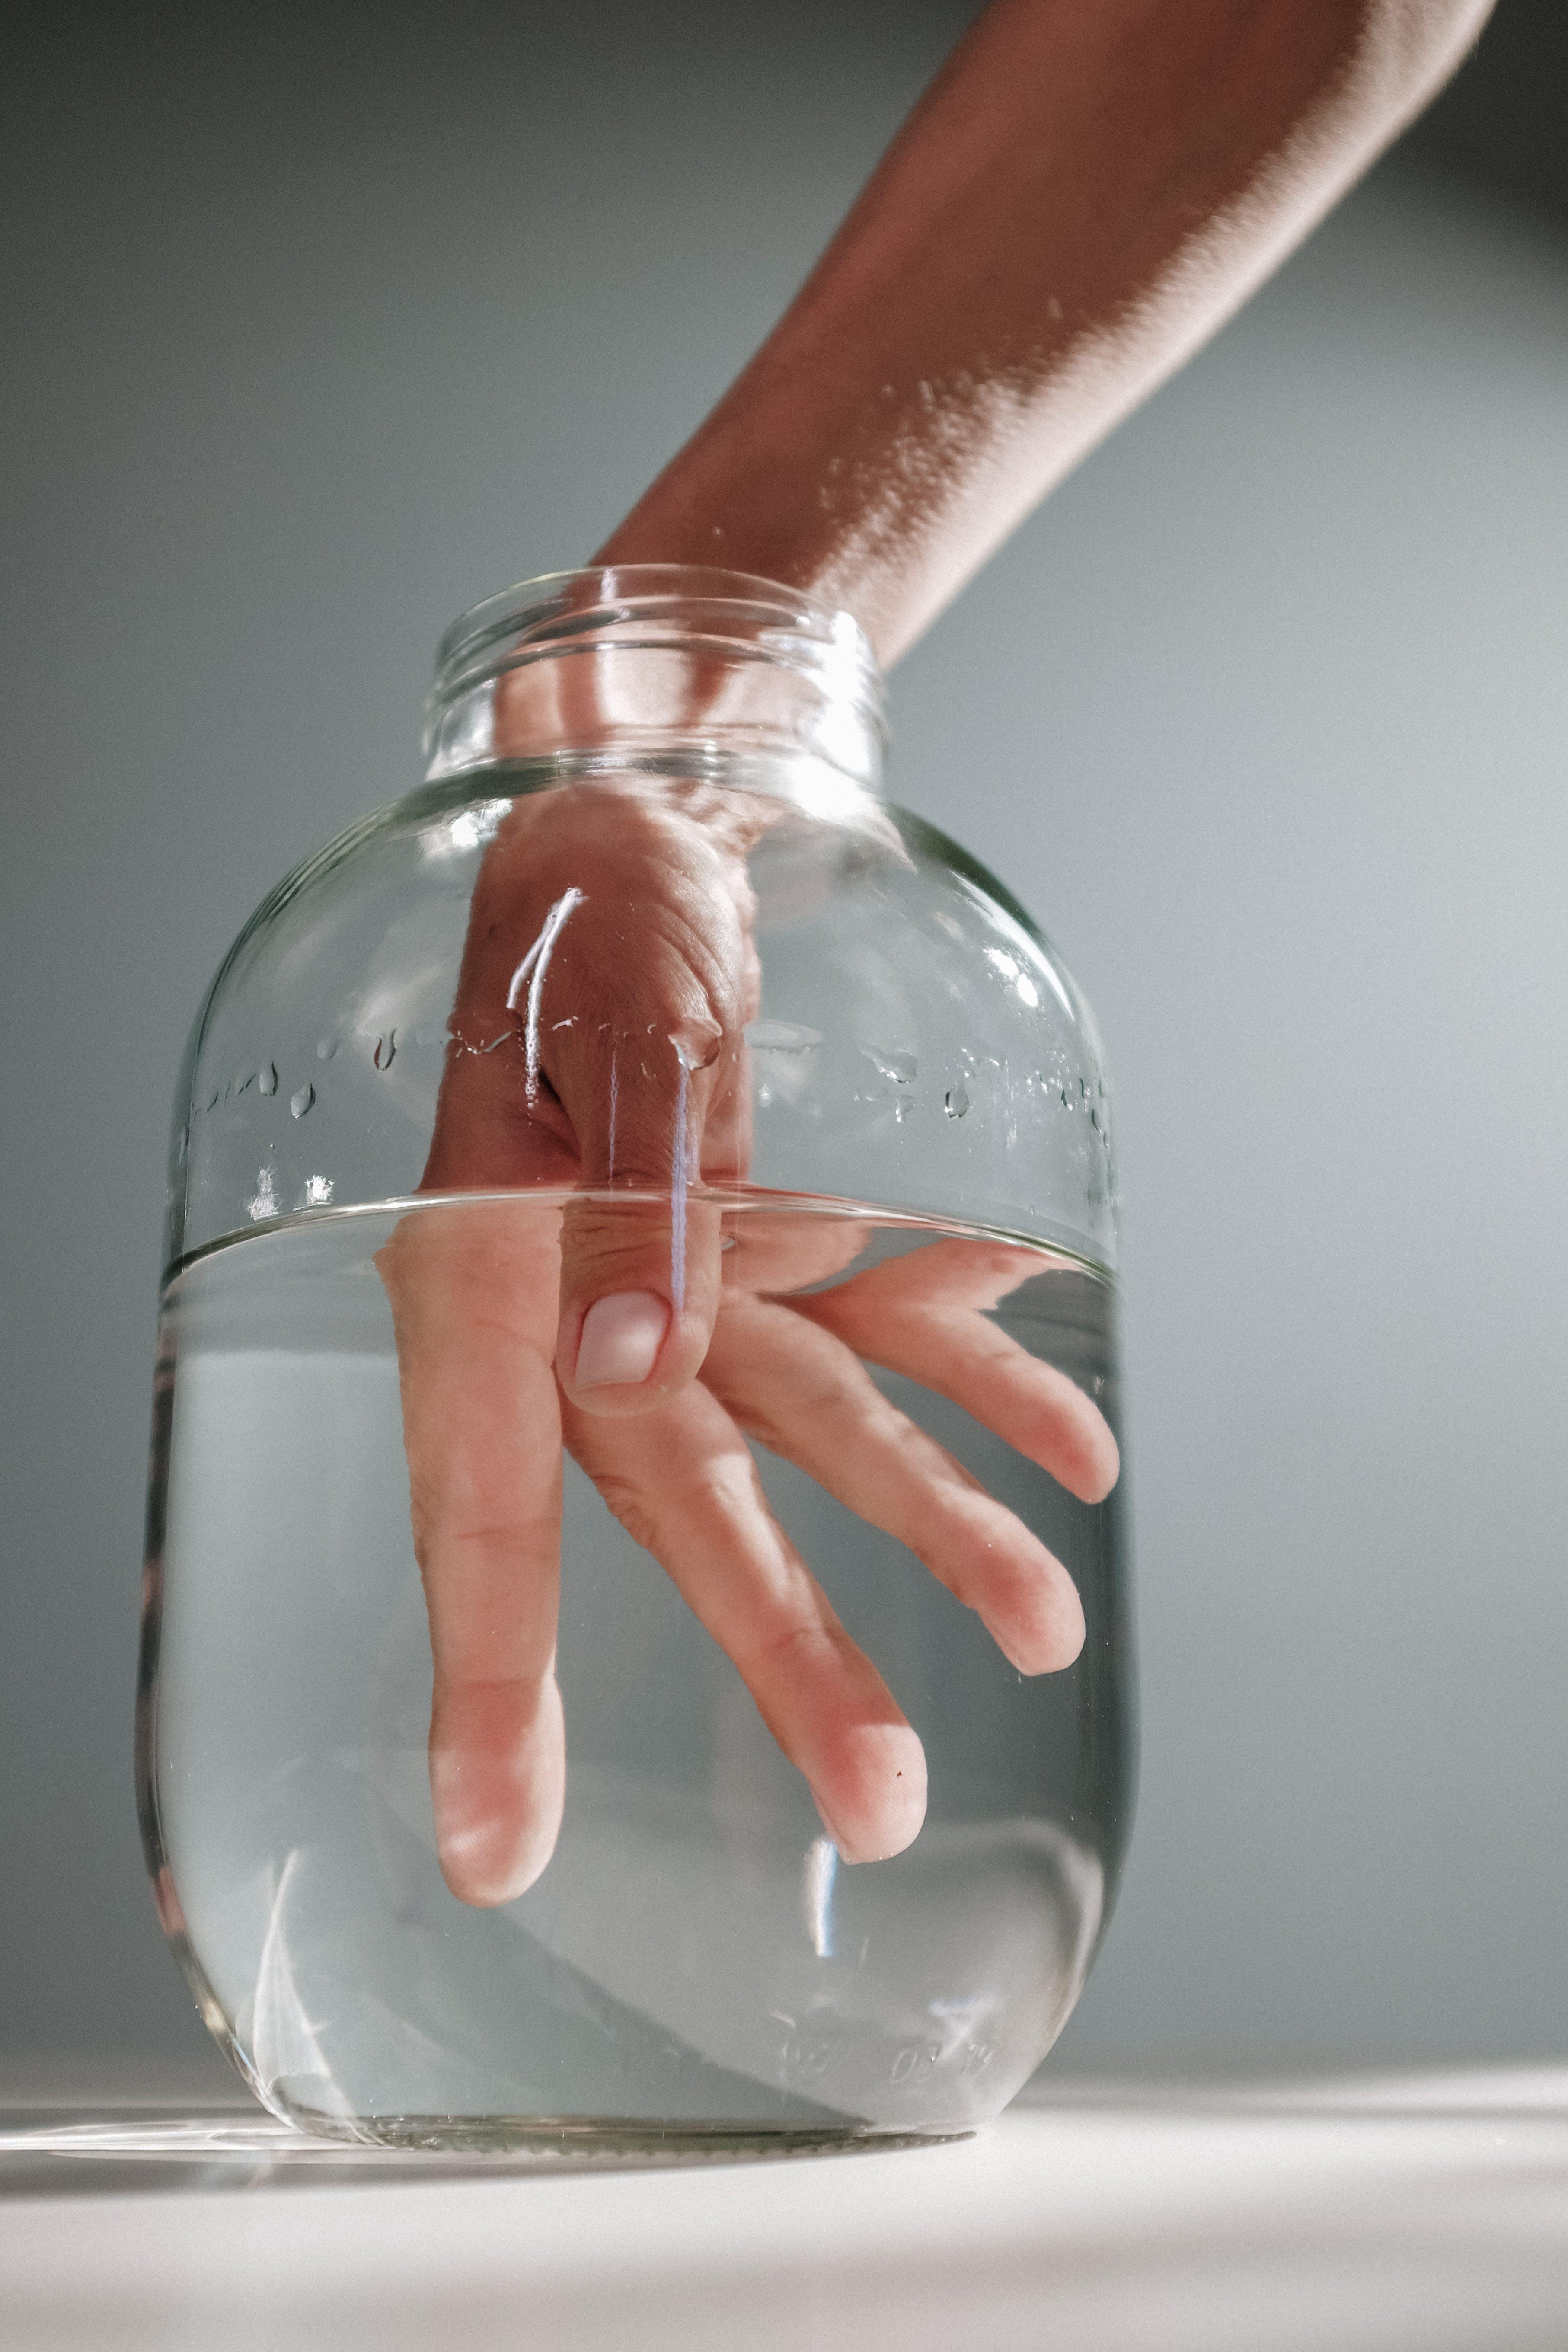 How long can you submerge your hand in ice water? 